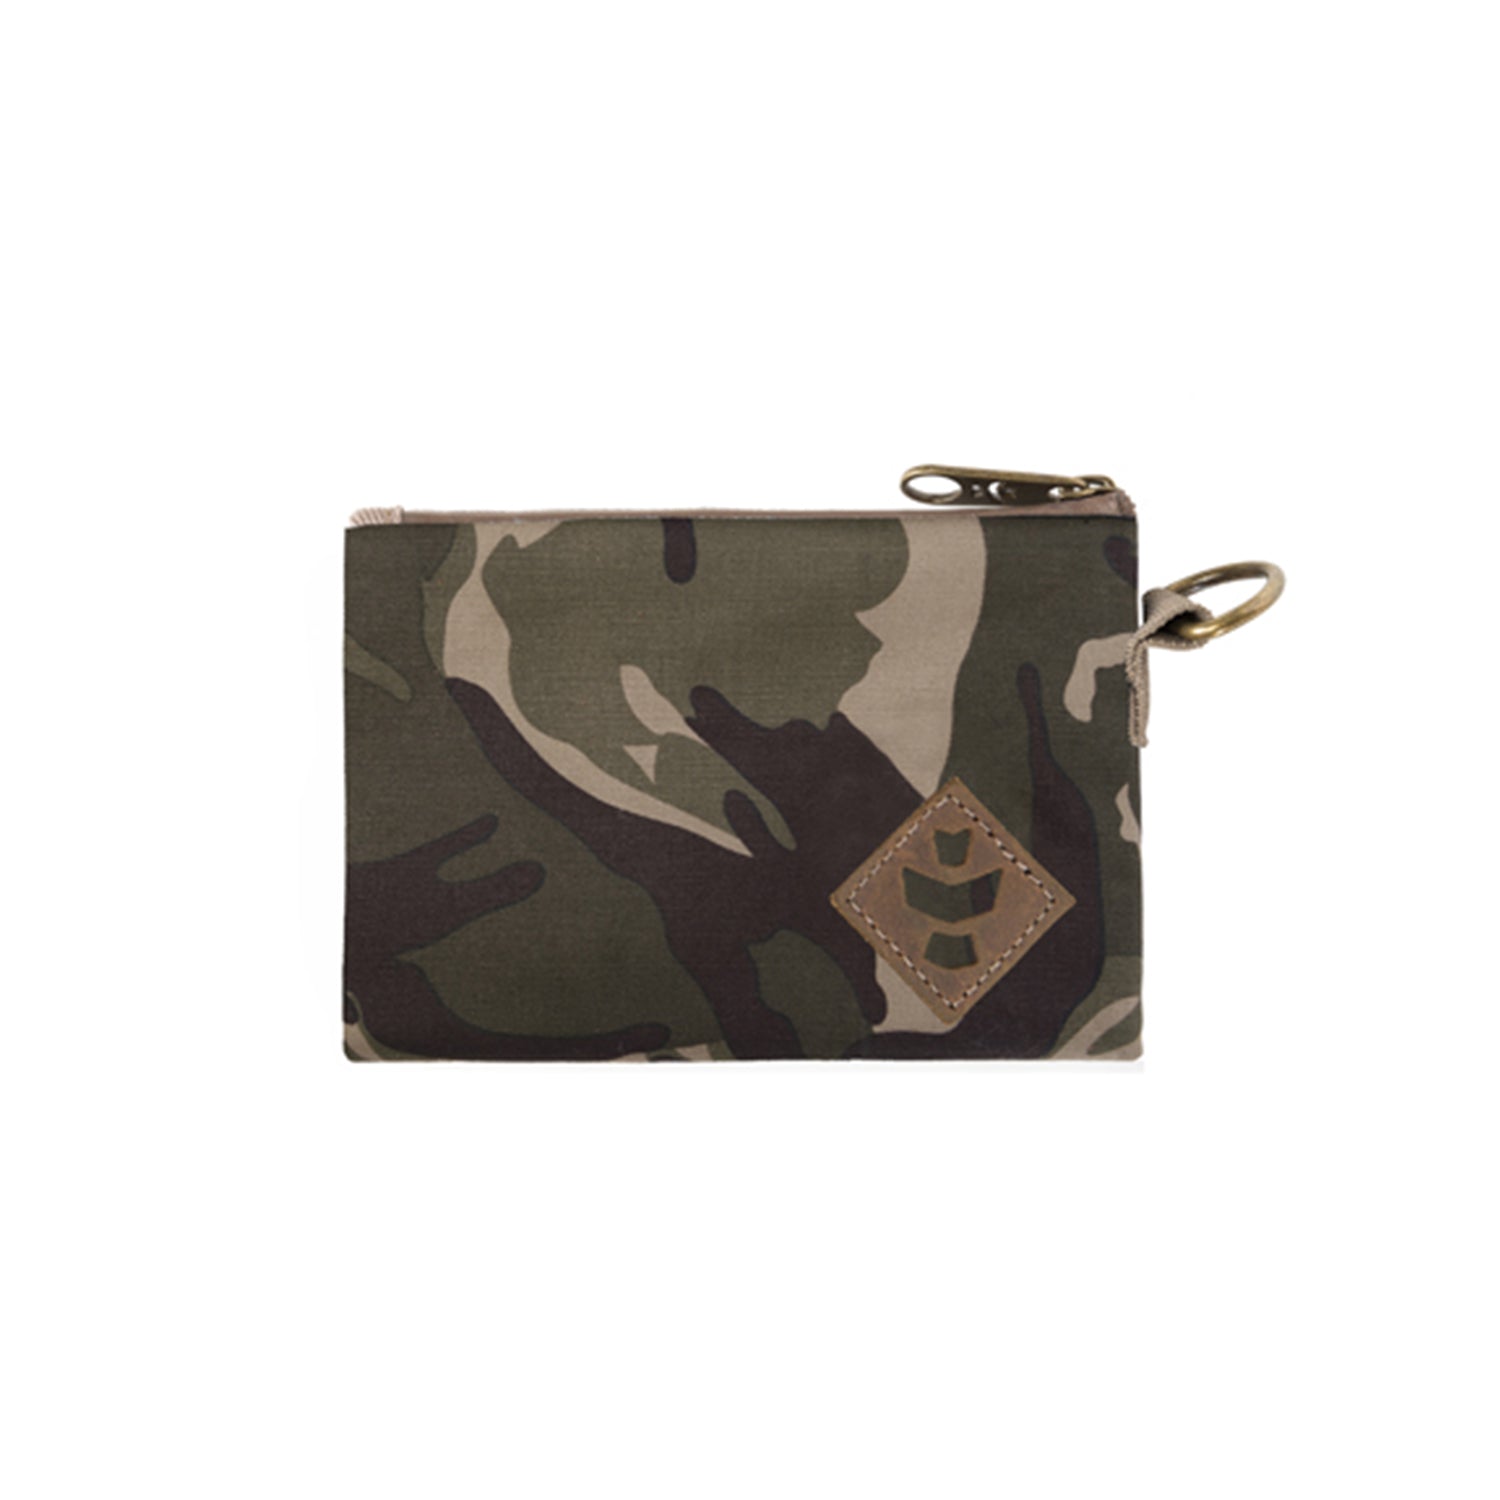 Camo Brown Canvas Smell Proof Water Resistant Small Zipper Bank Bag